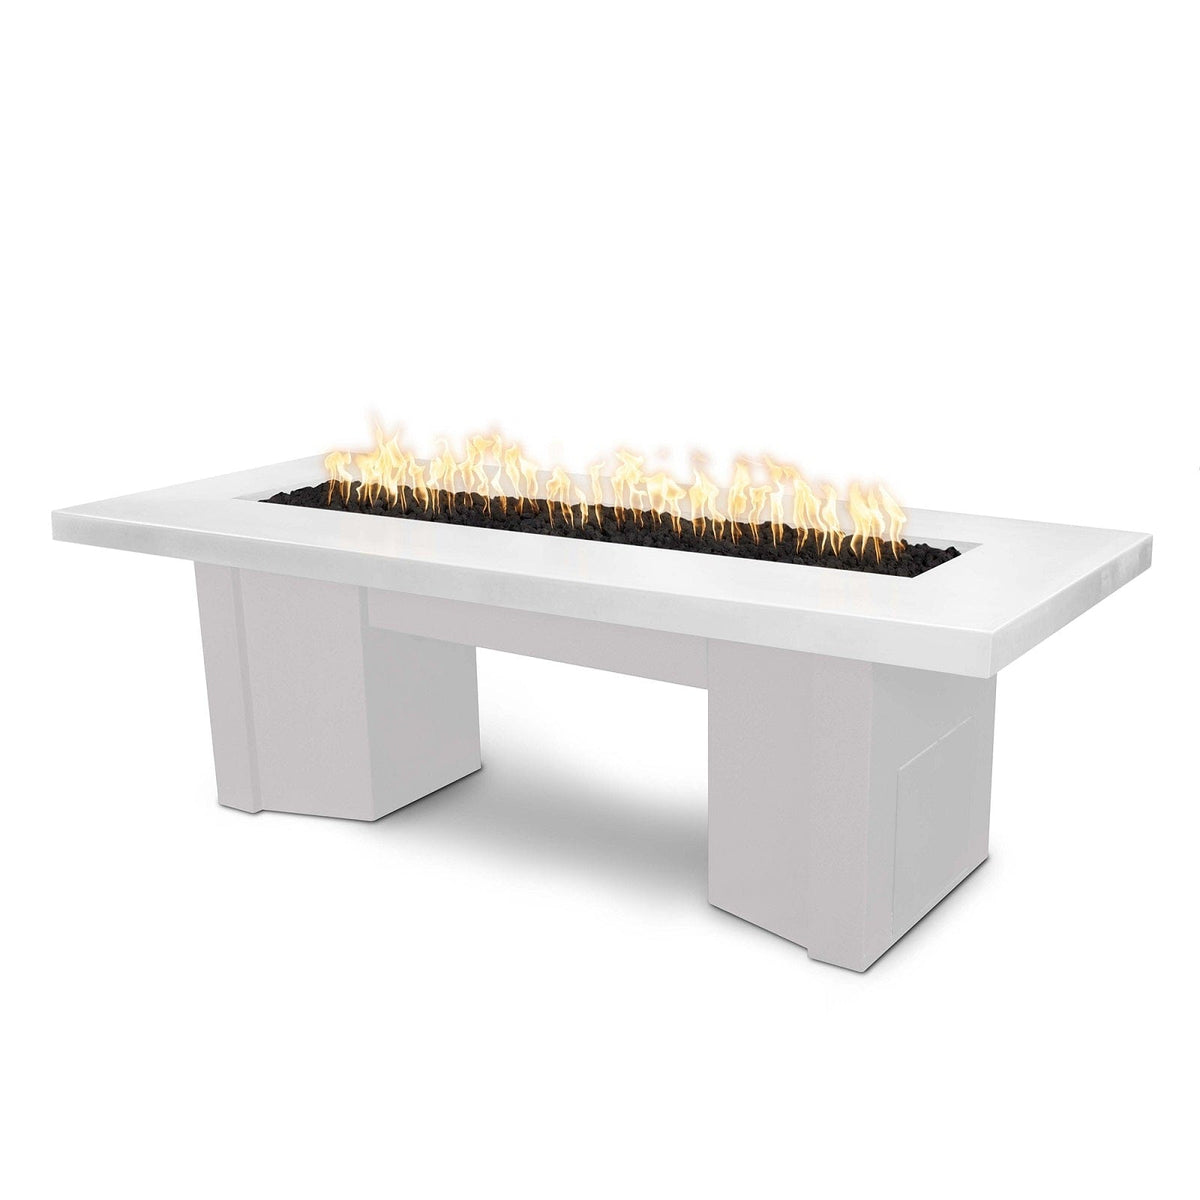 The Outdoor Plus Fire Features Limestone (-LIM) / White Powder Coated Steel (-WHT) The Outdoor Plus 78&quot; Alameda Fire Table Smooth Concrete in Liquid Propane - Match Lit with Flame Sense System / OPT-ALMGFRC78FSML-LP